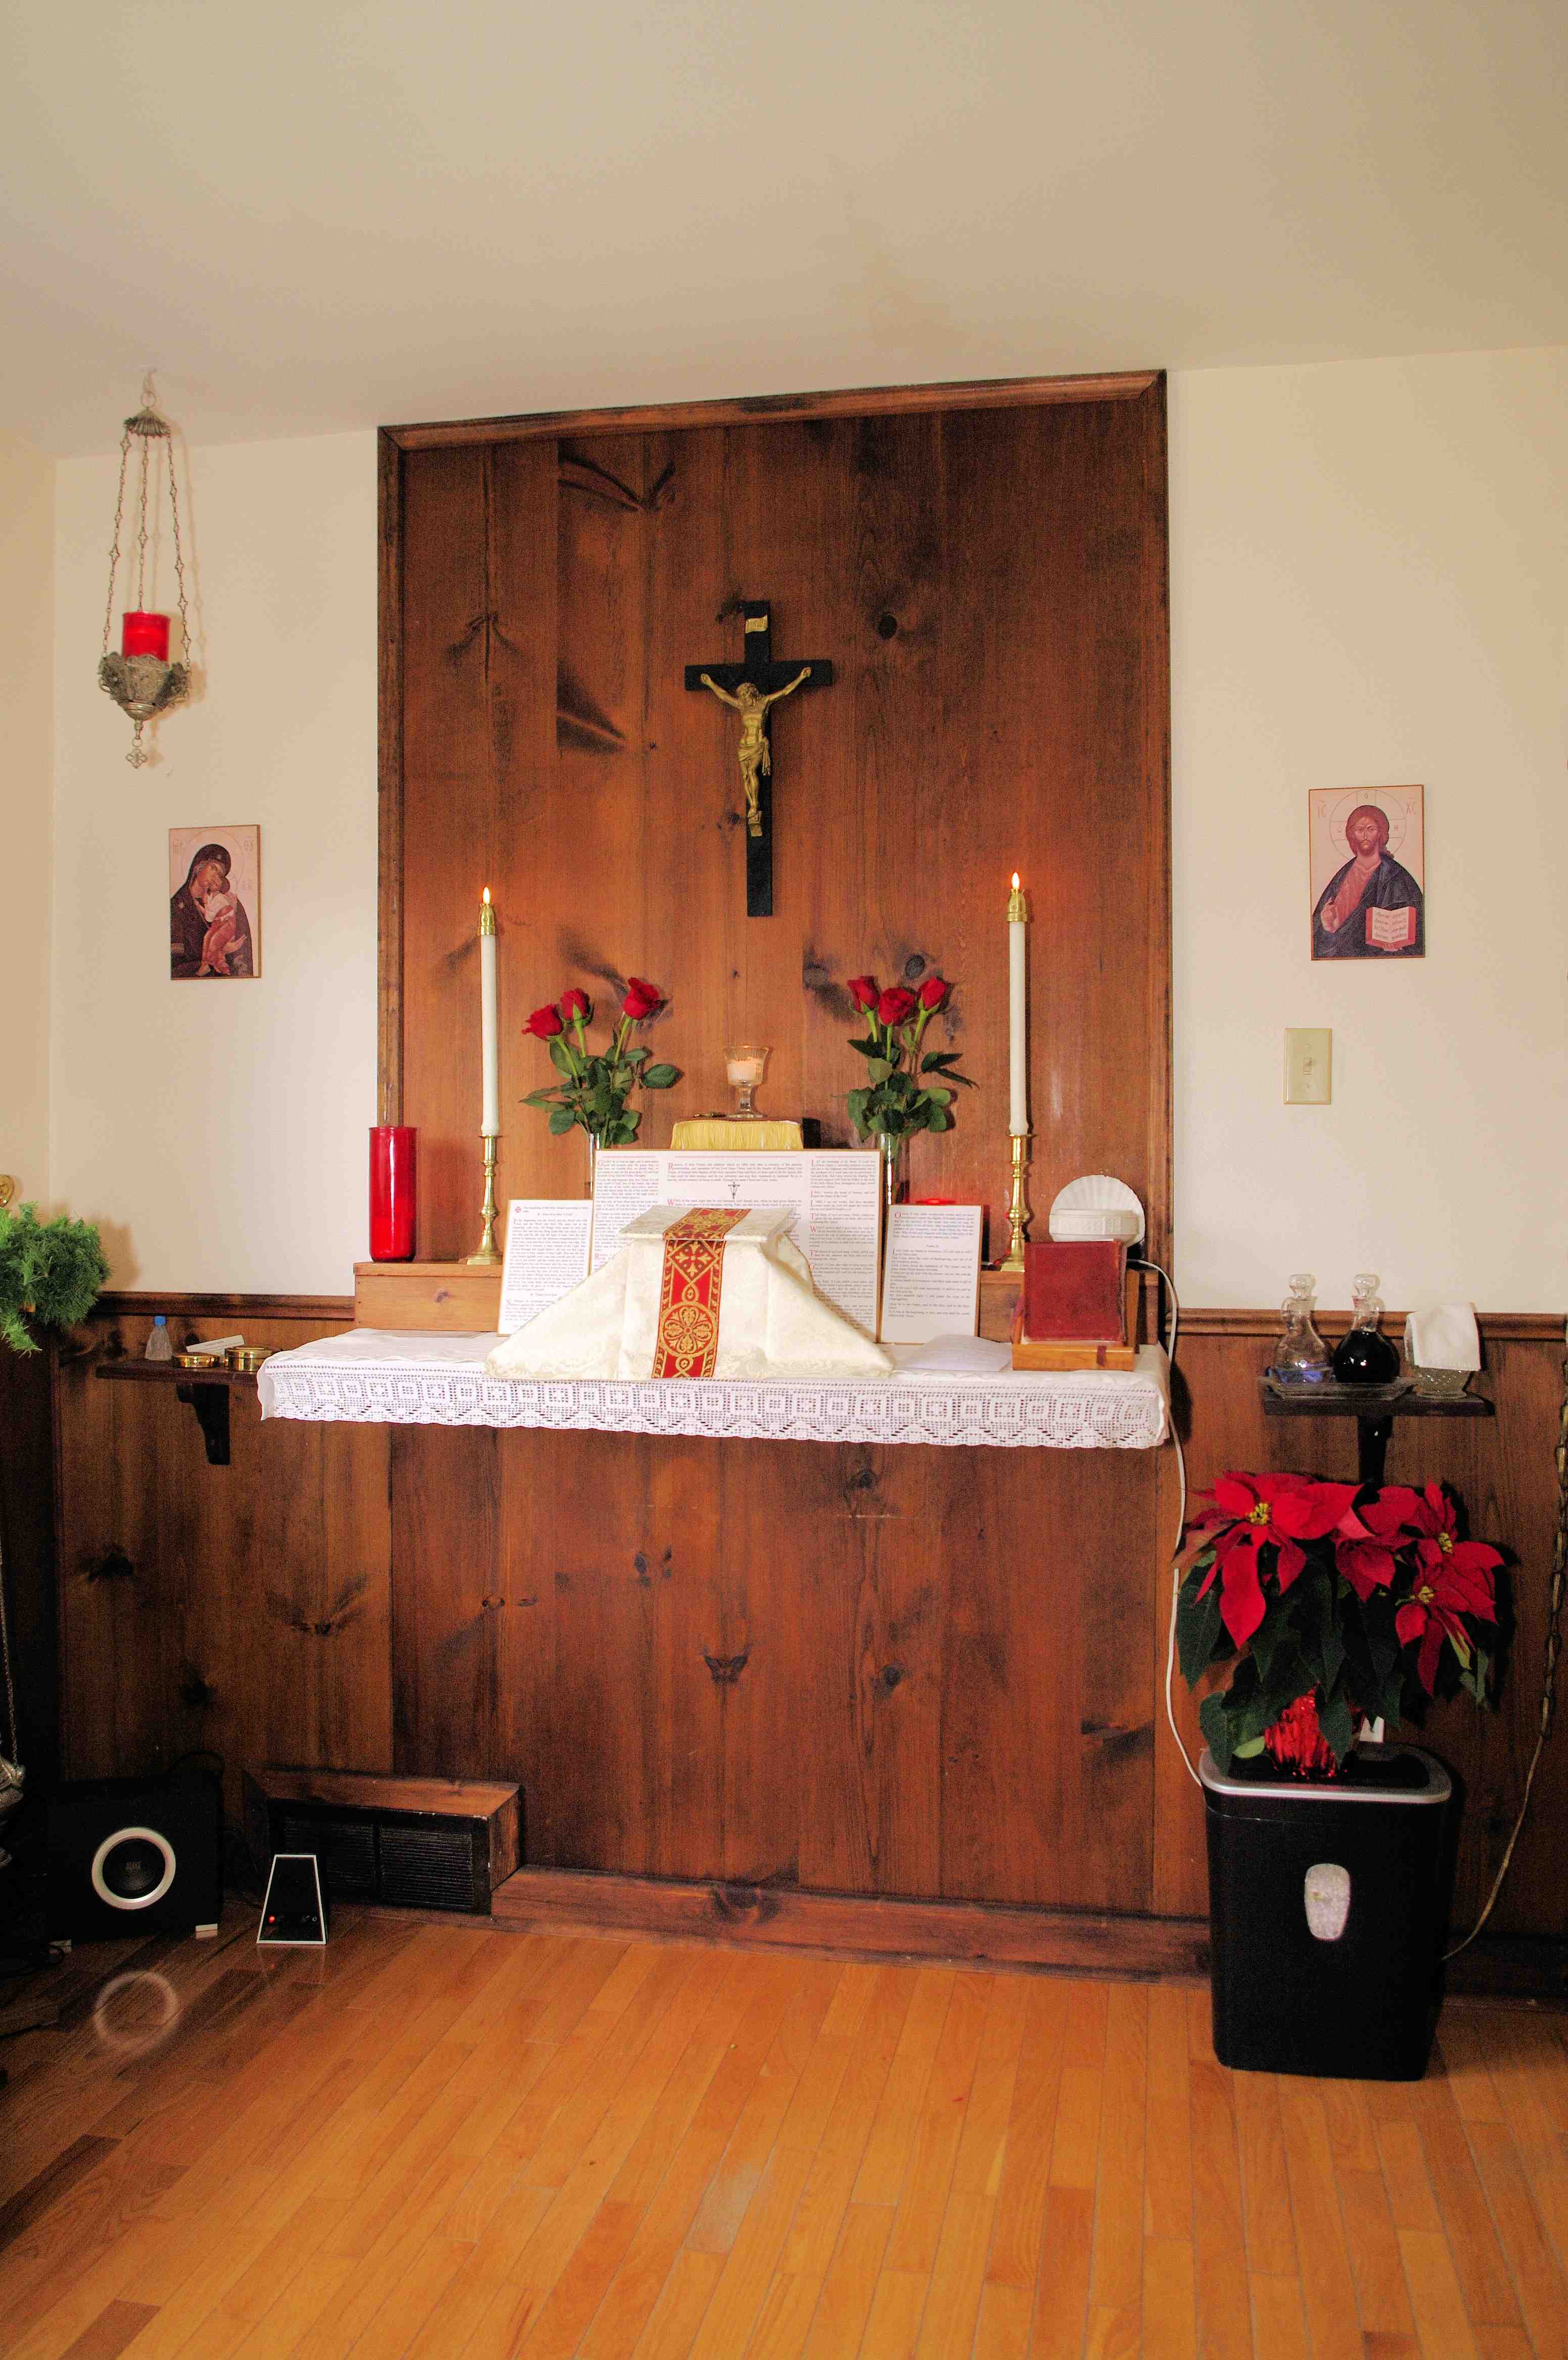 The Altar at St. John's readied for Christmas 2015